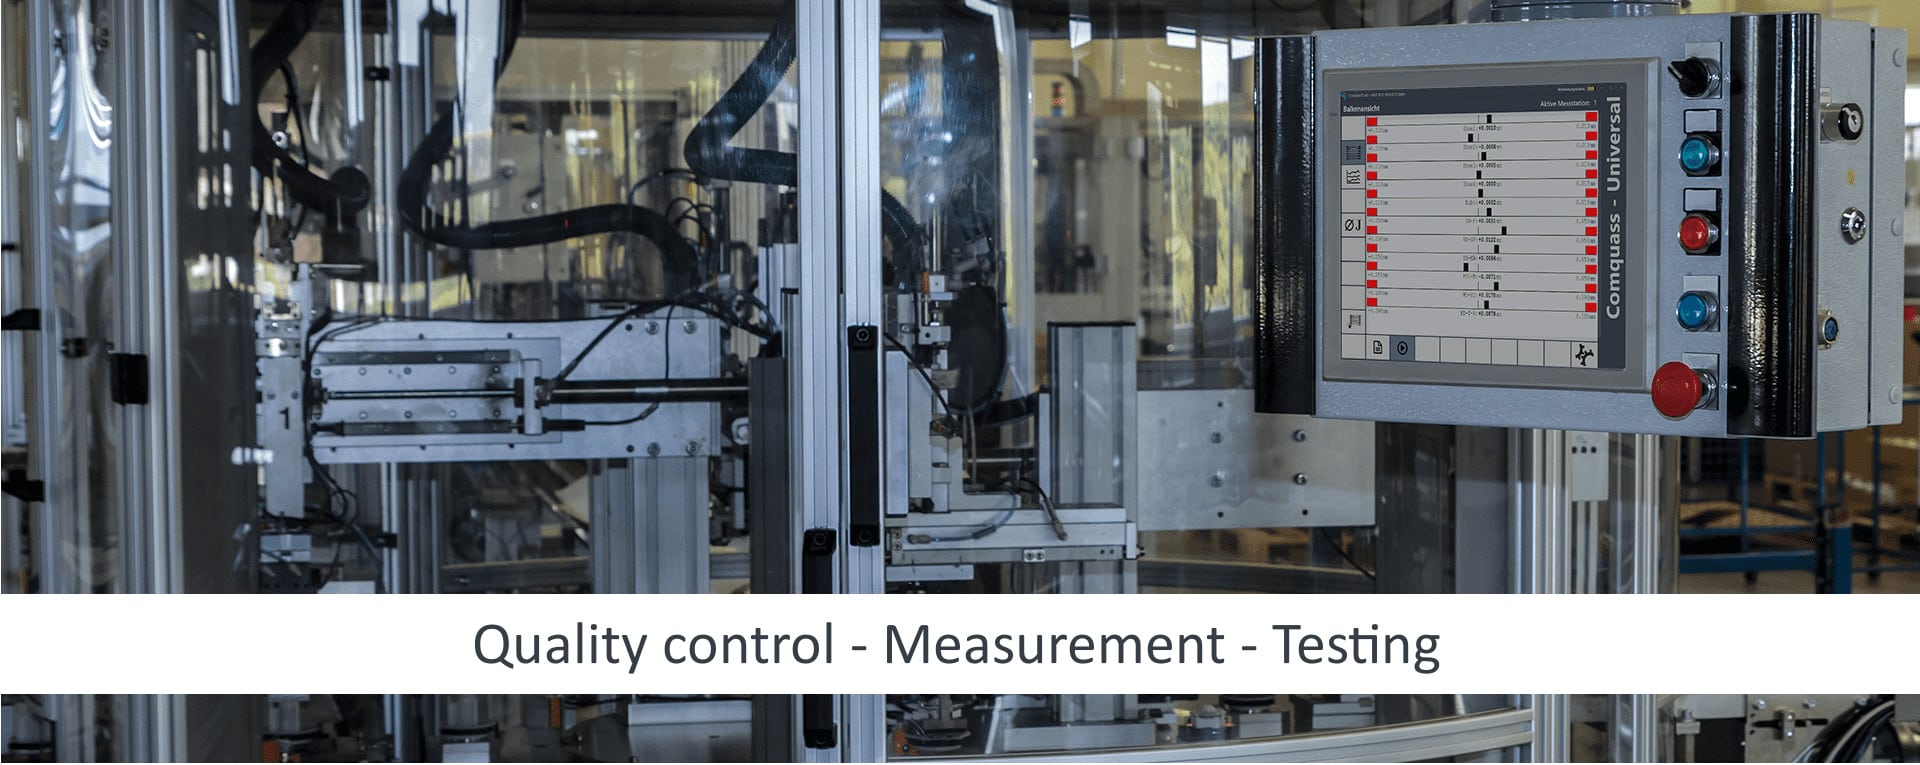 industrial quality assurance (QA) for measuring and testing tasks from manual measuring stations to fully automatic measuring stations